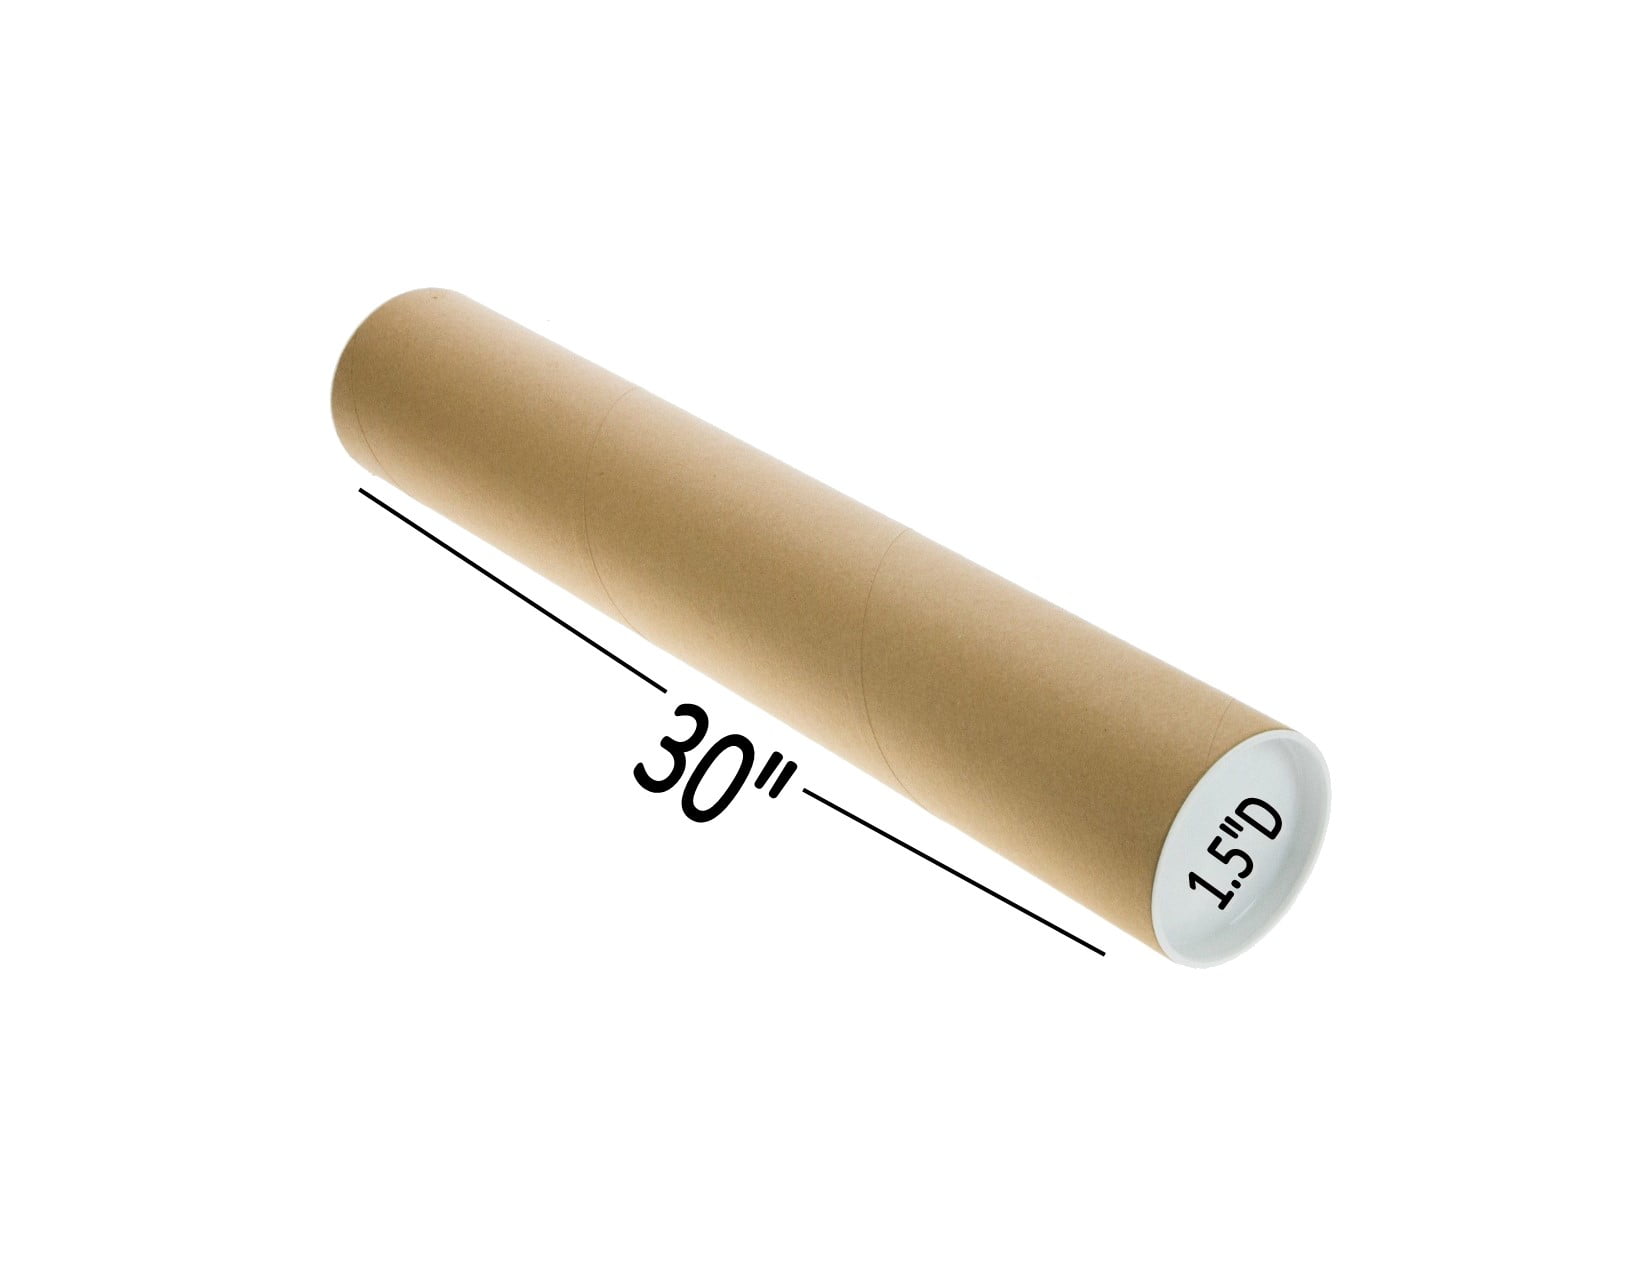 CertBuy 16 Pack Kraft Mailing Tubes with Caps for Packaging Posters, 15.7  Inch Shipping Tubes for Mailing, Storing and Protecting Documents